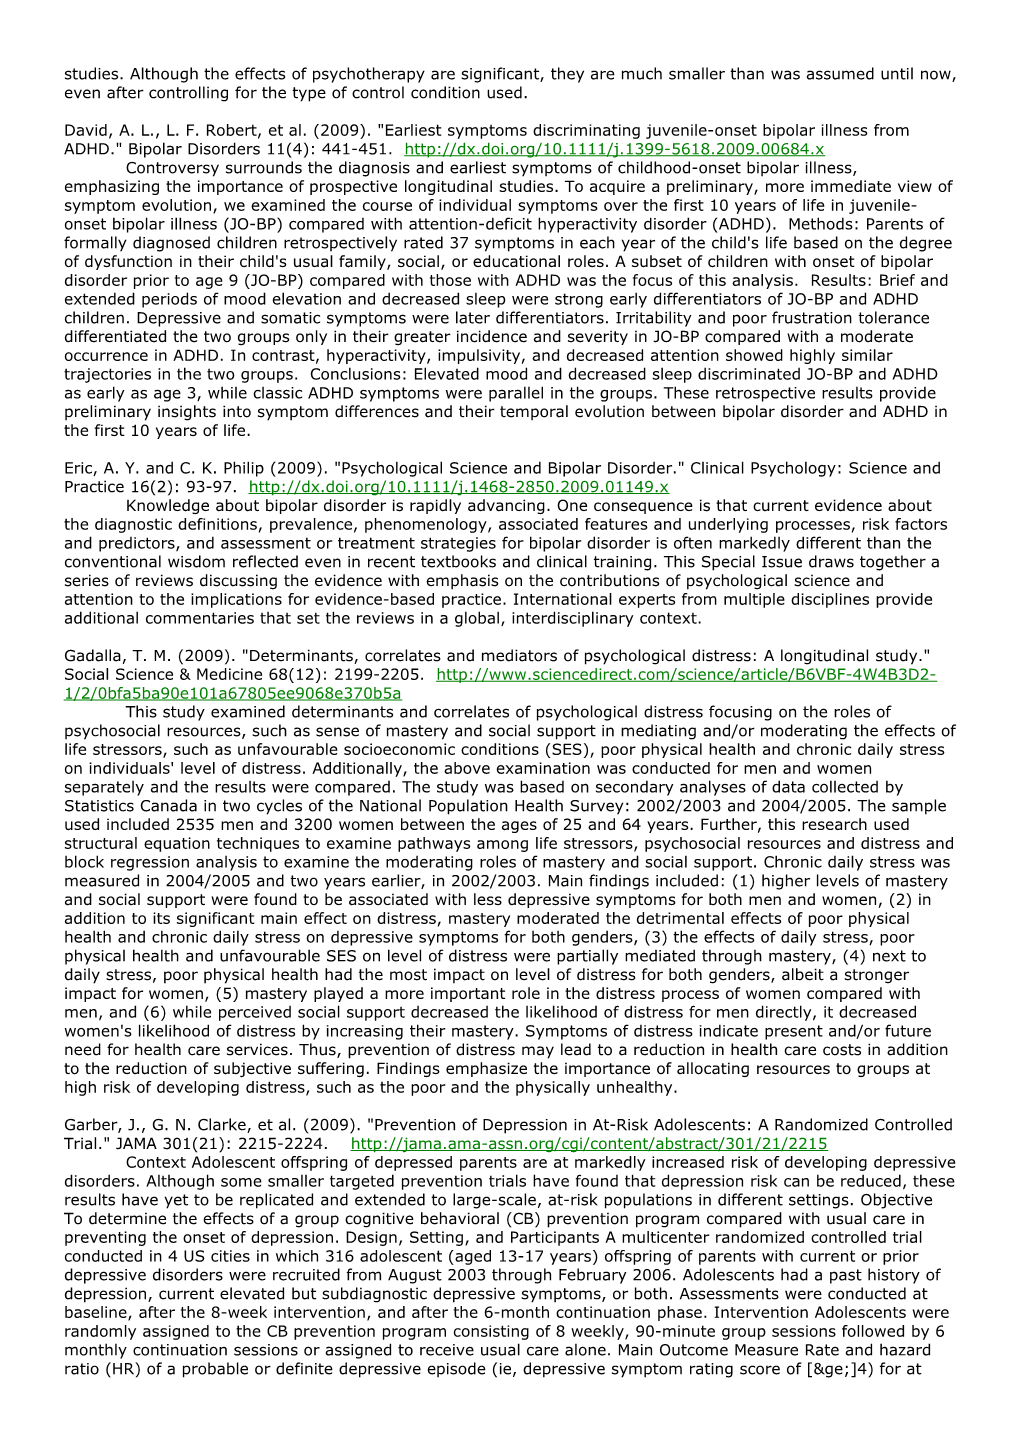 25 Depression Alliance Abstracts, June 09